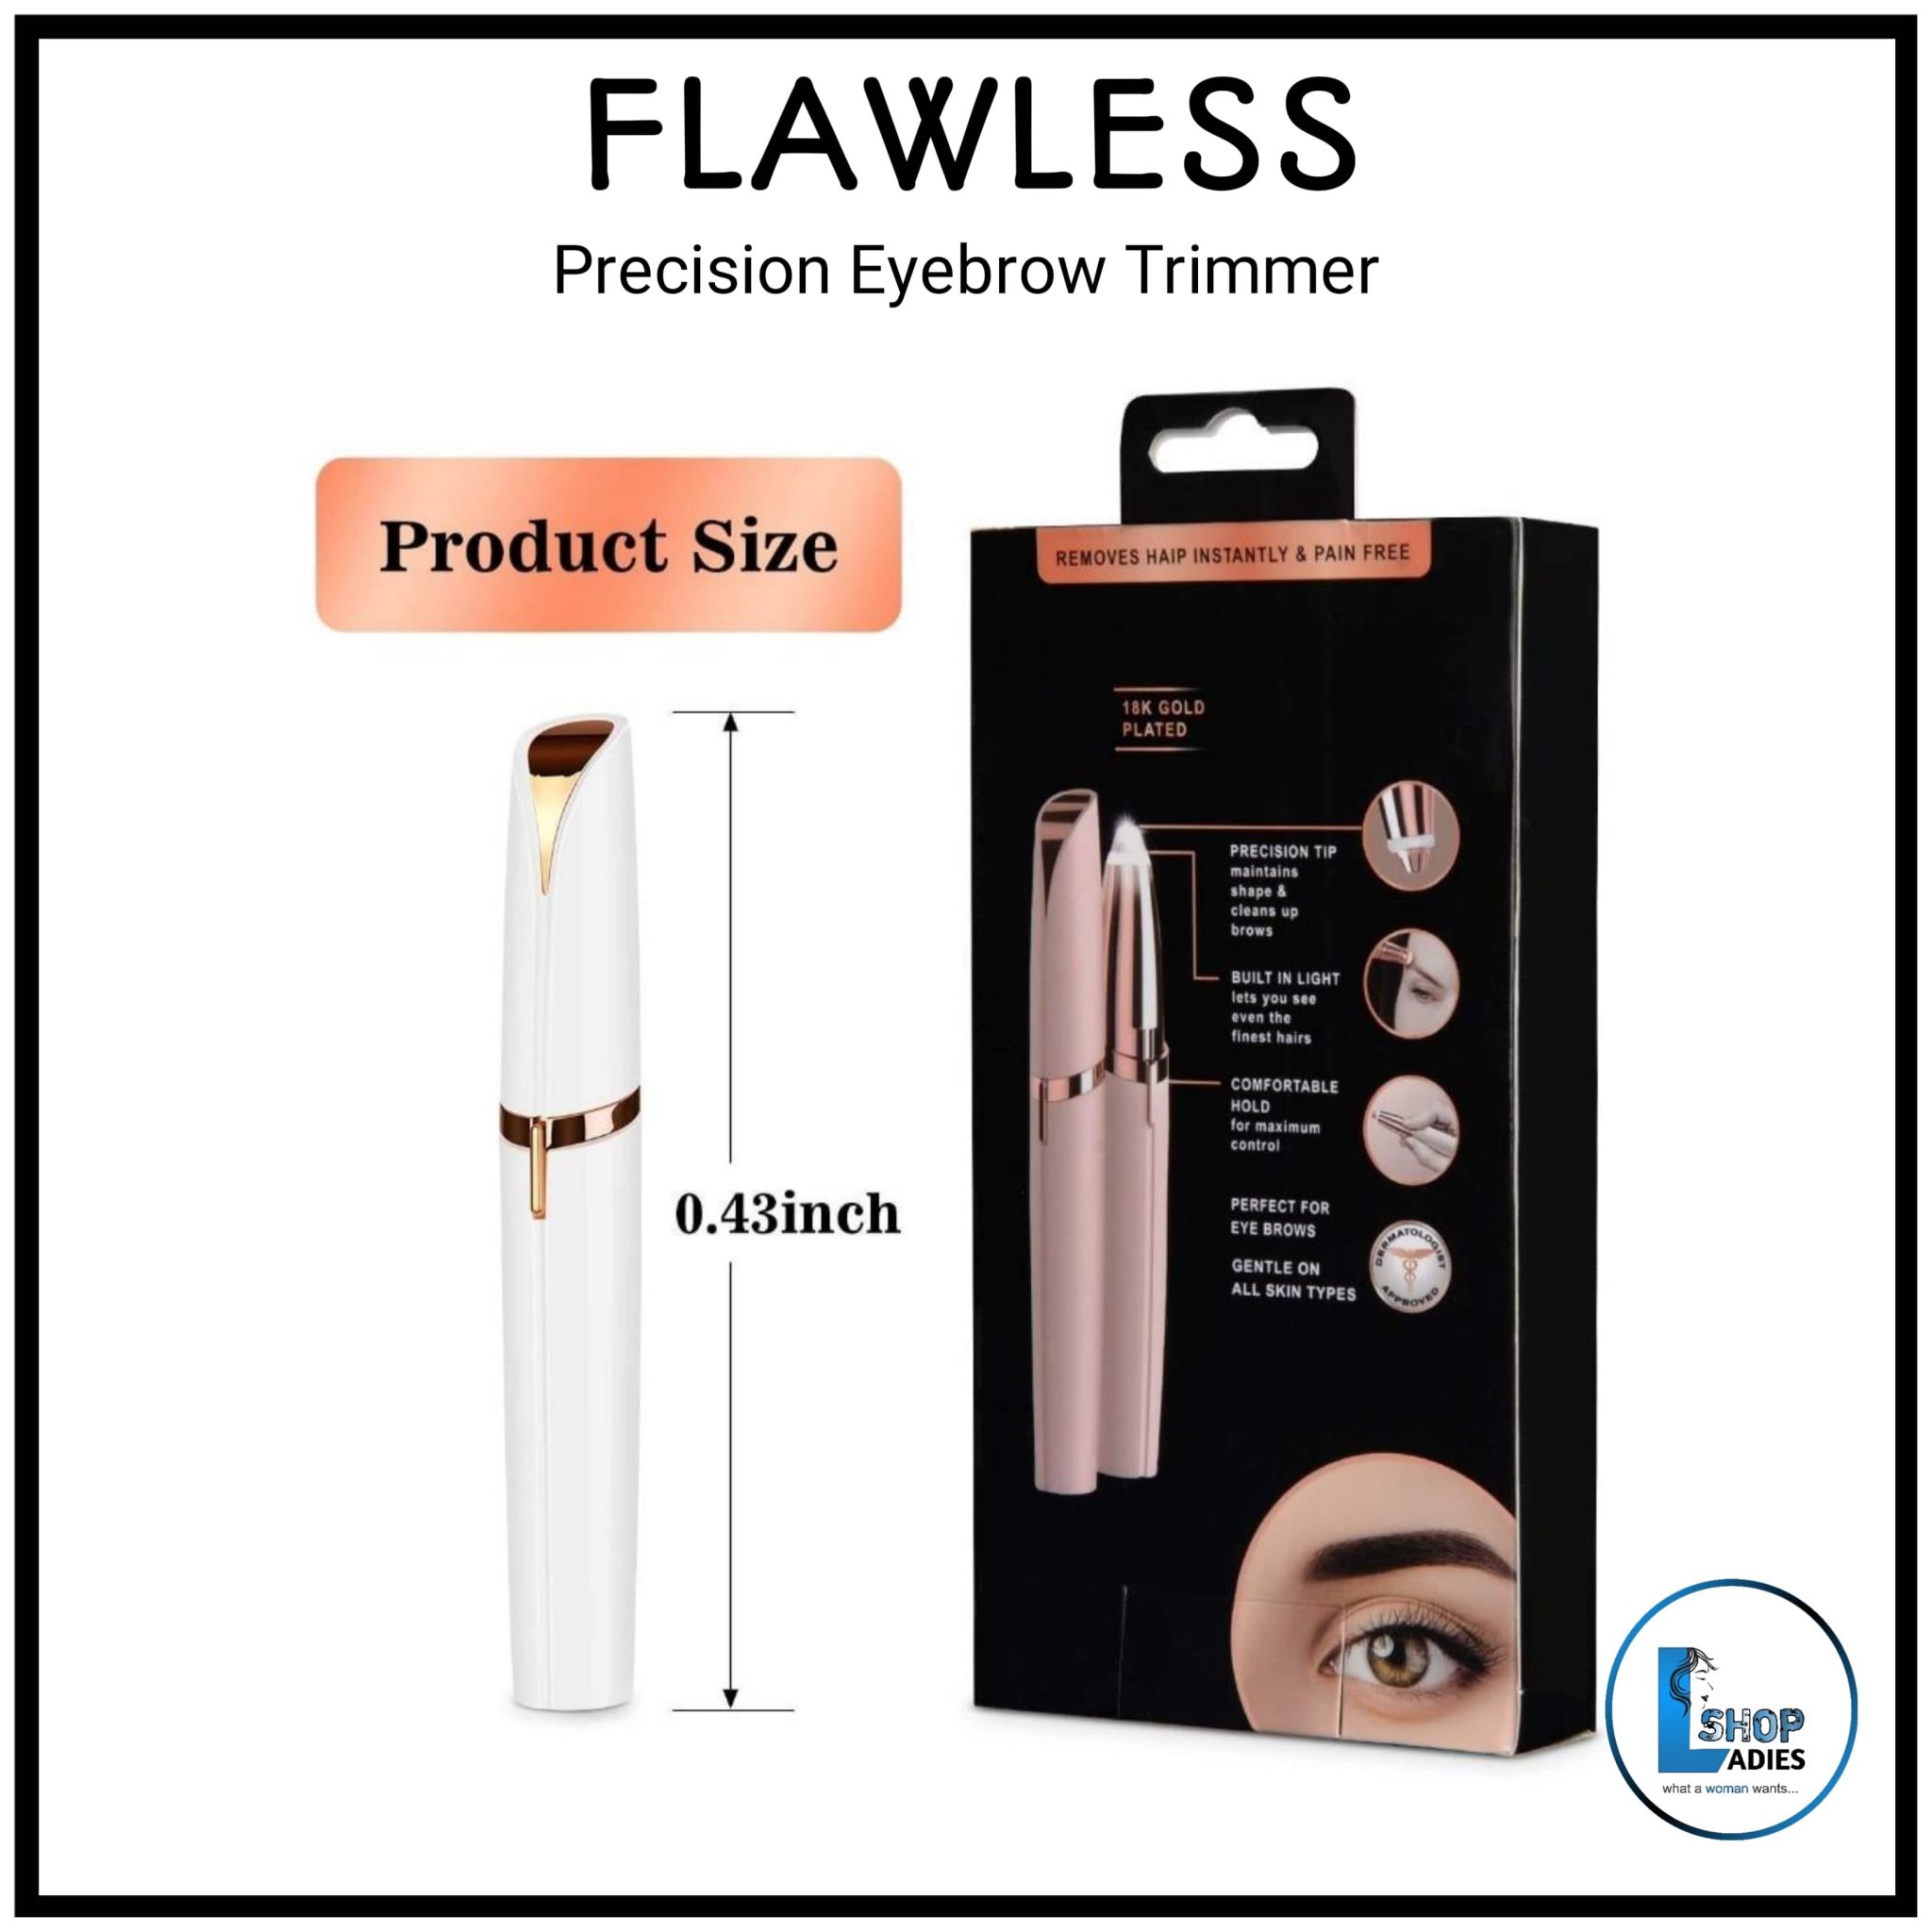 flawless eyebrow trimmer